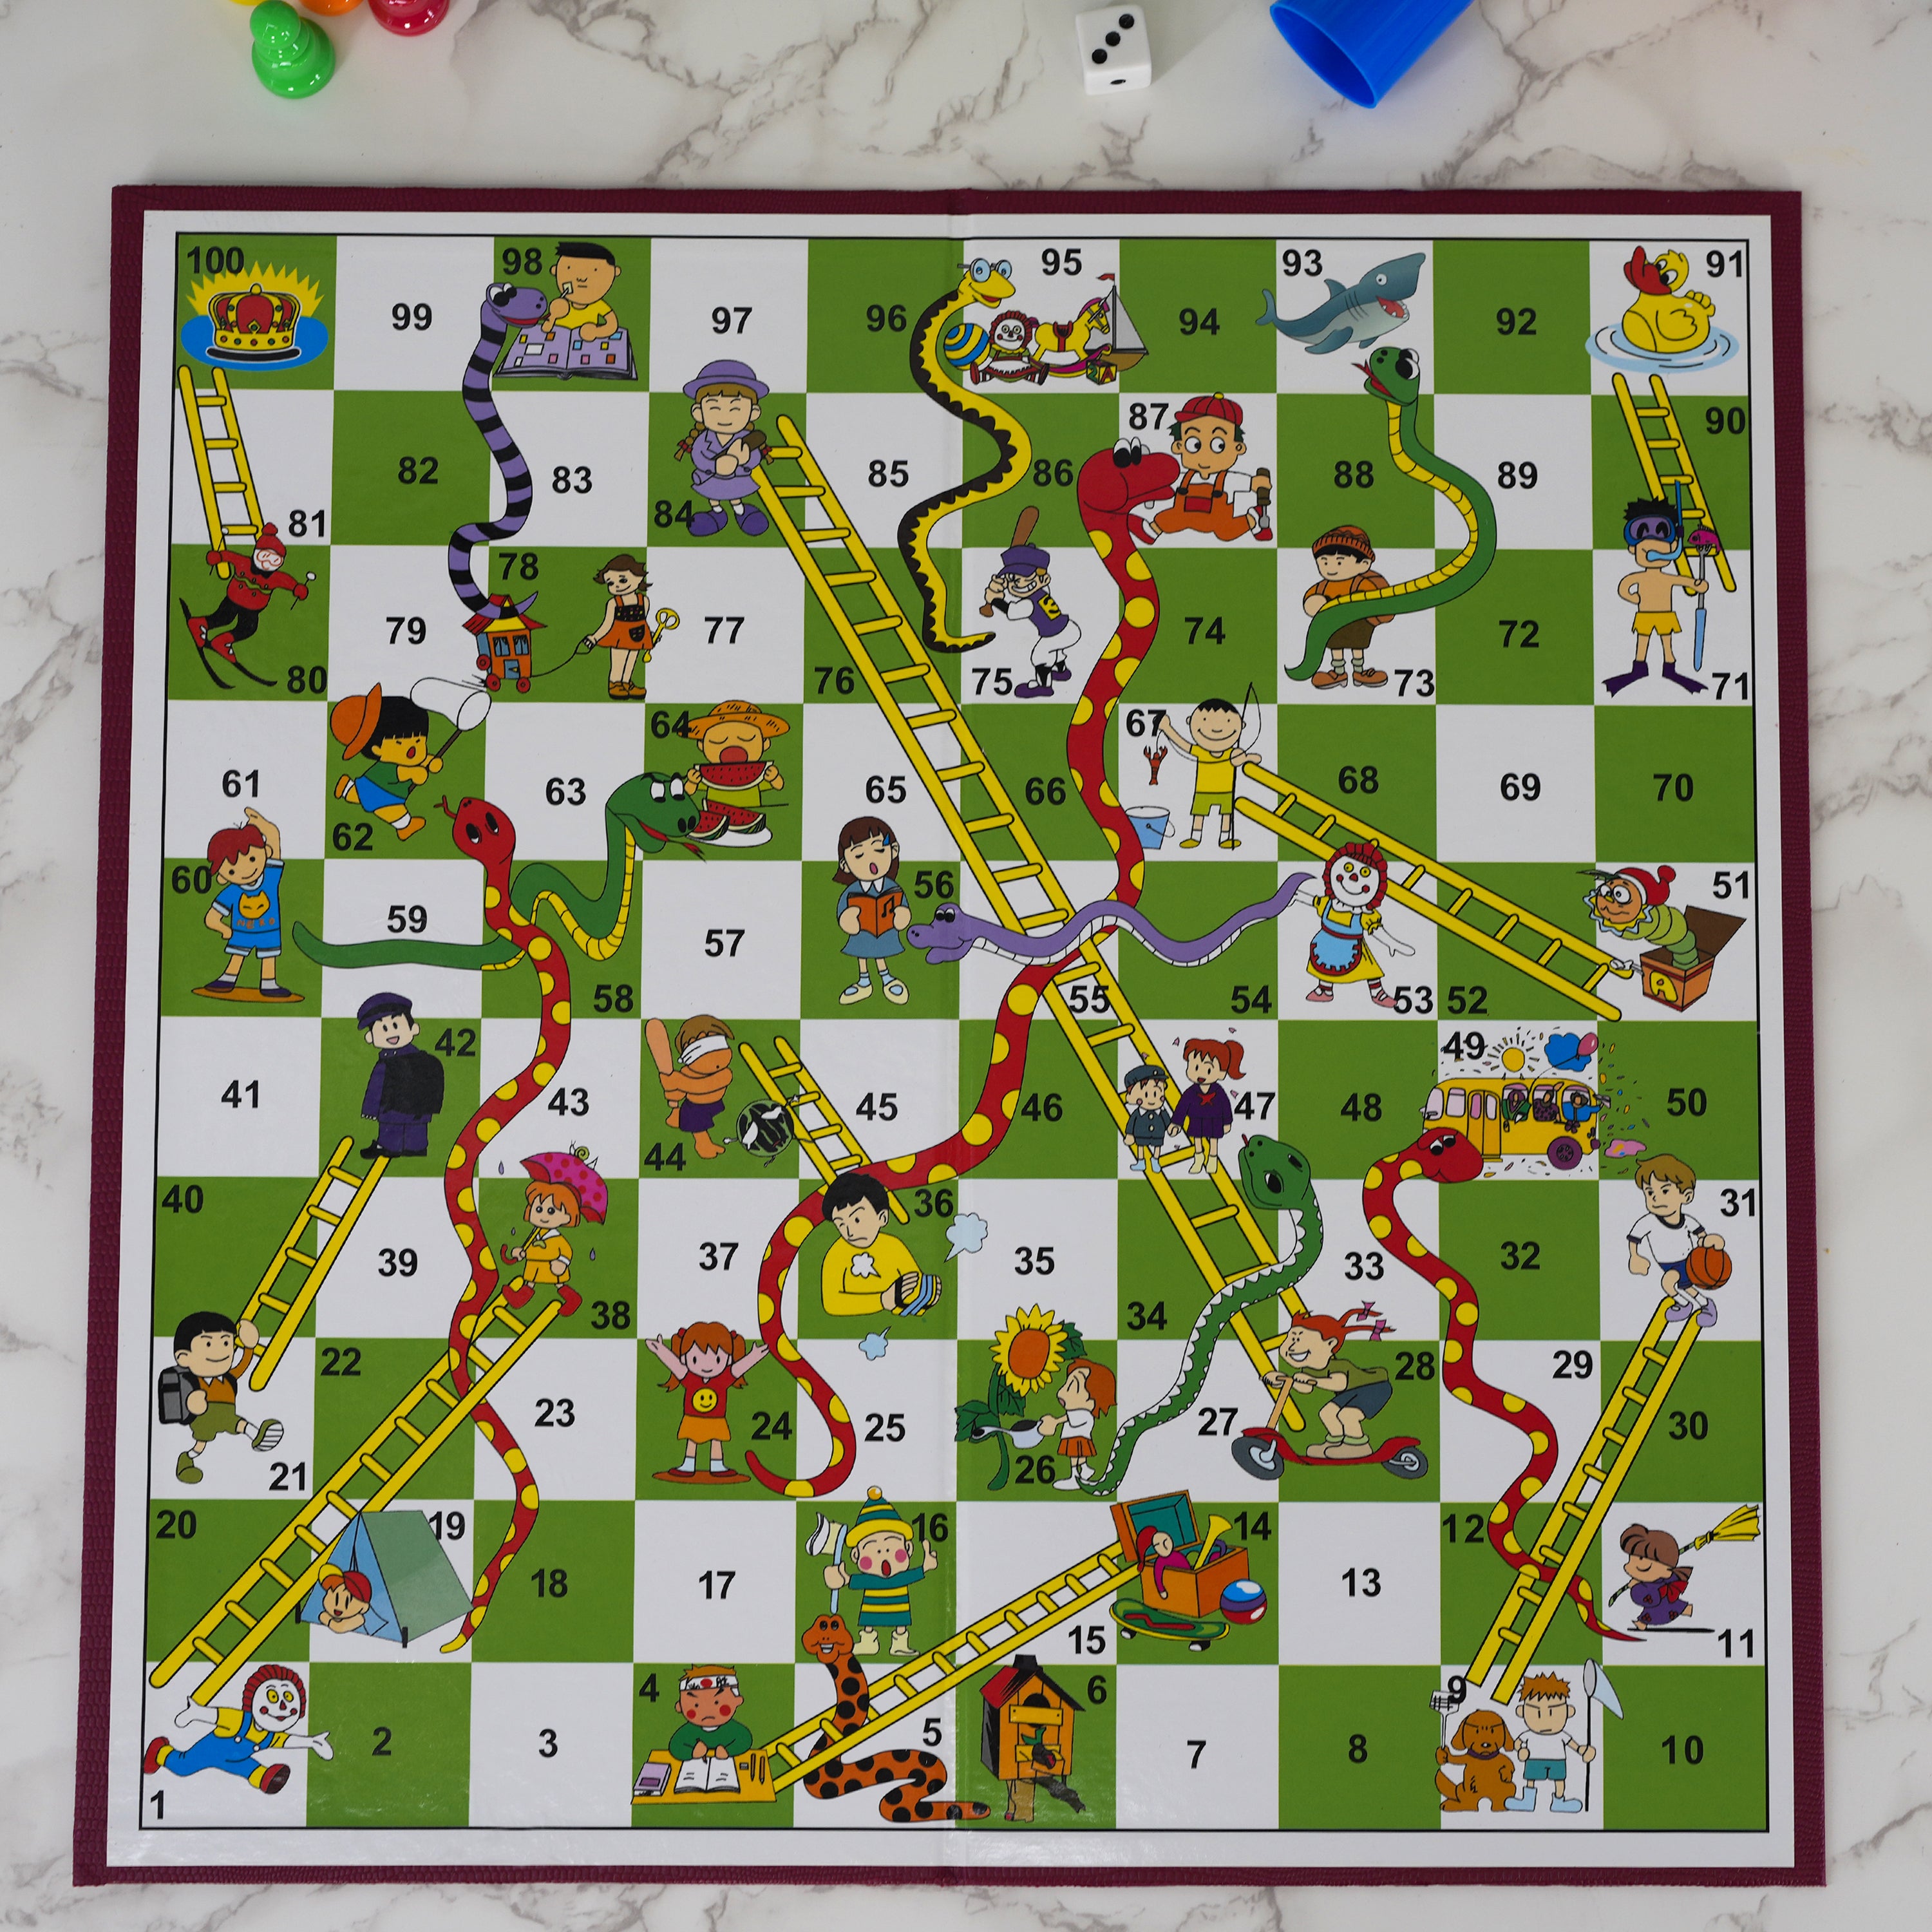 Snakes and Ladders Traditional Board Game M.Y - The Magic Toy Shop